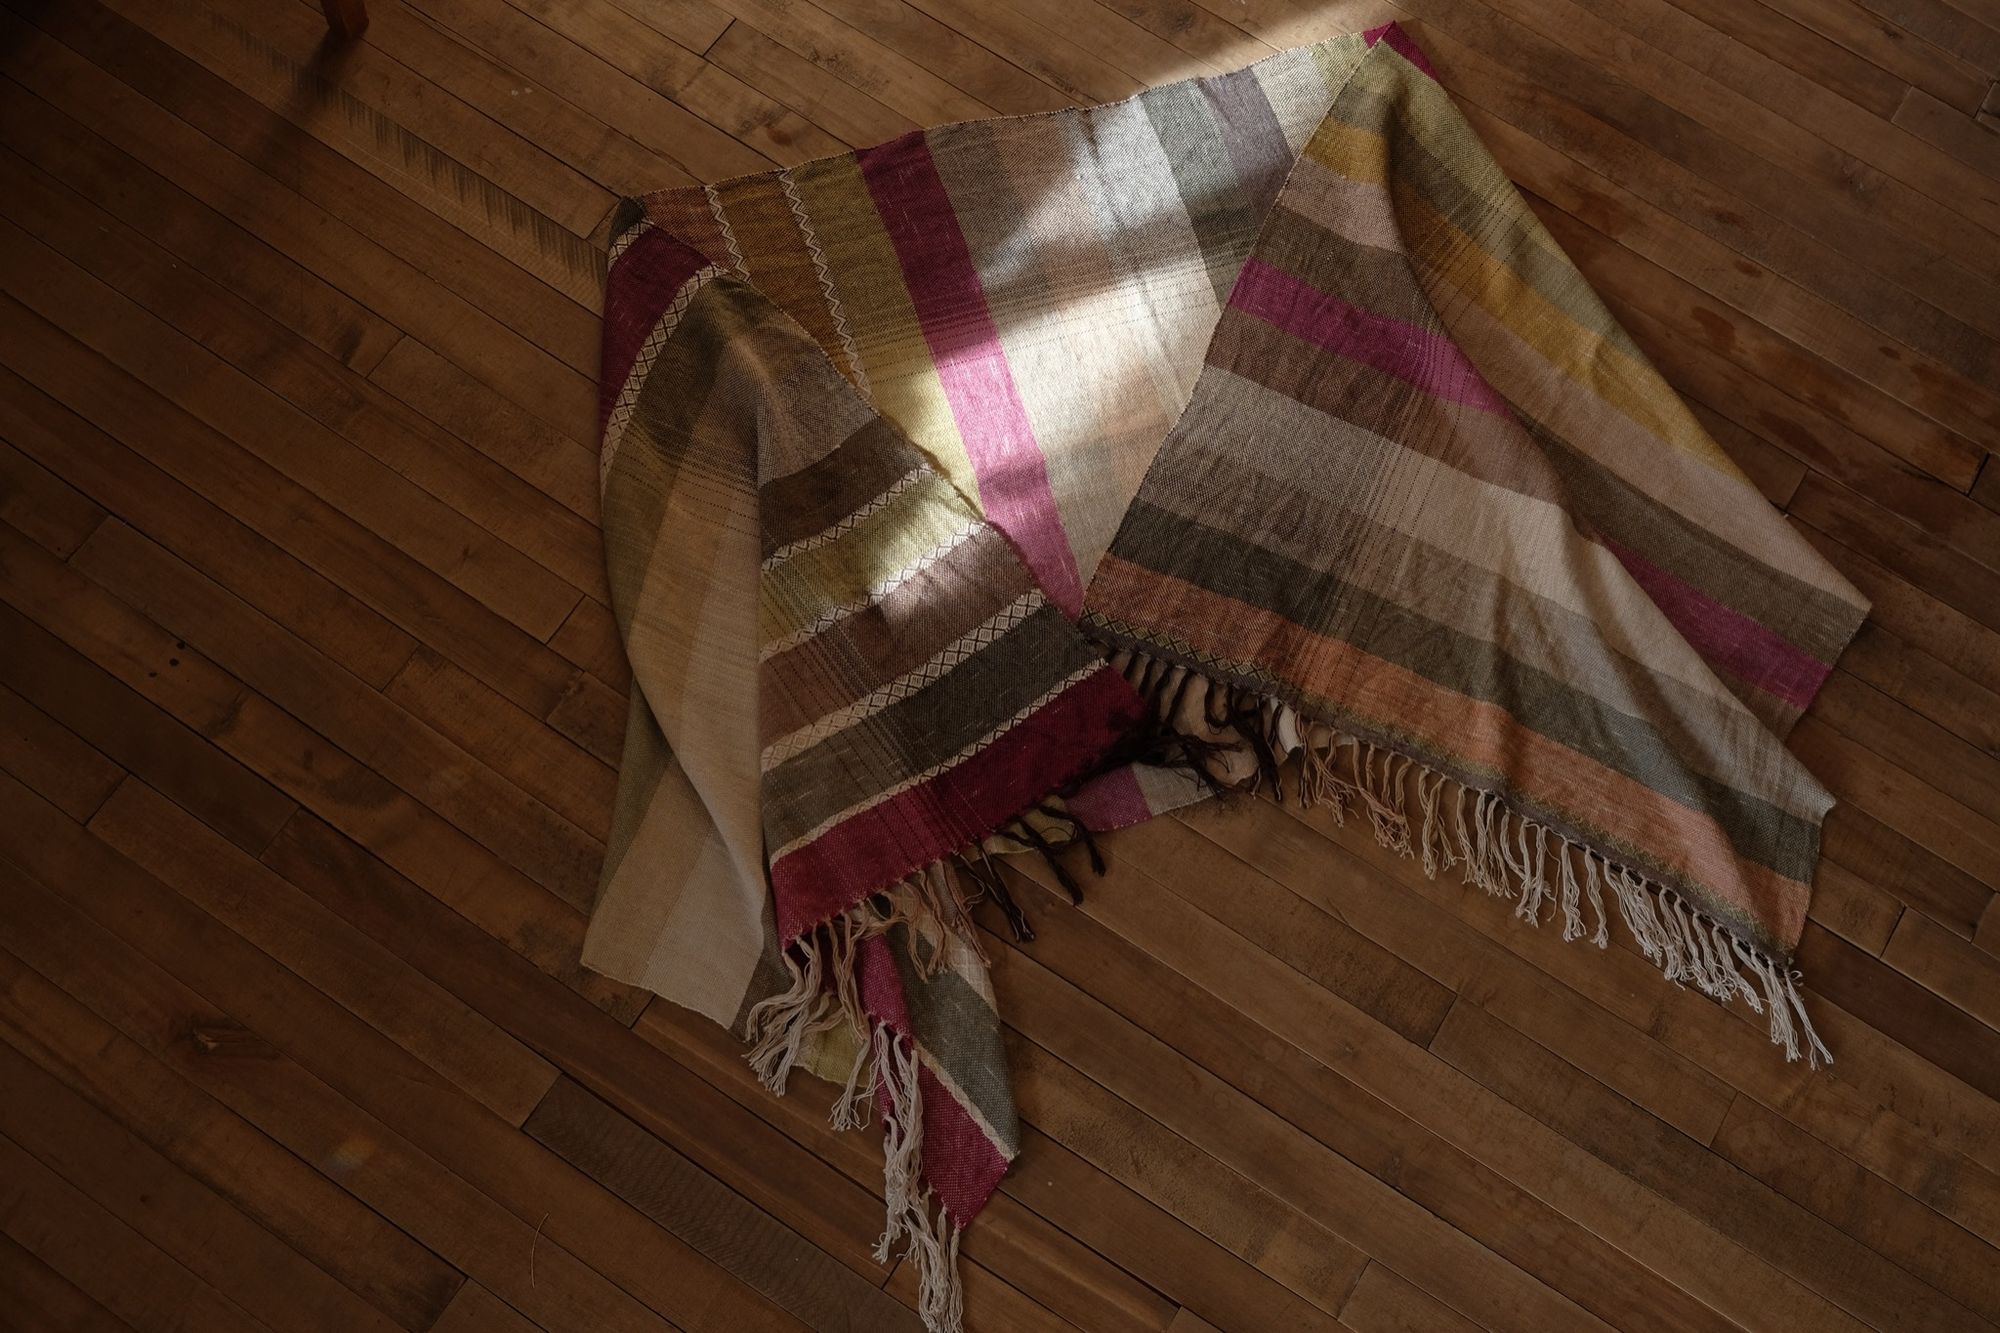 A detail of handwoven silk fabric in soft rainbow striped shades, naturally dyed, laying on a wooden floor